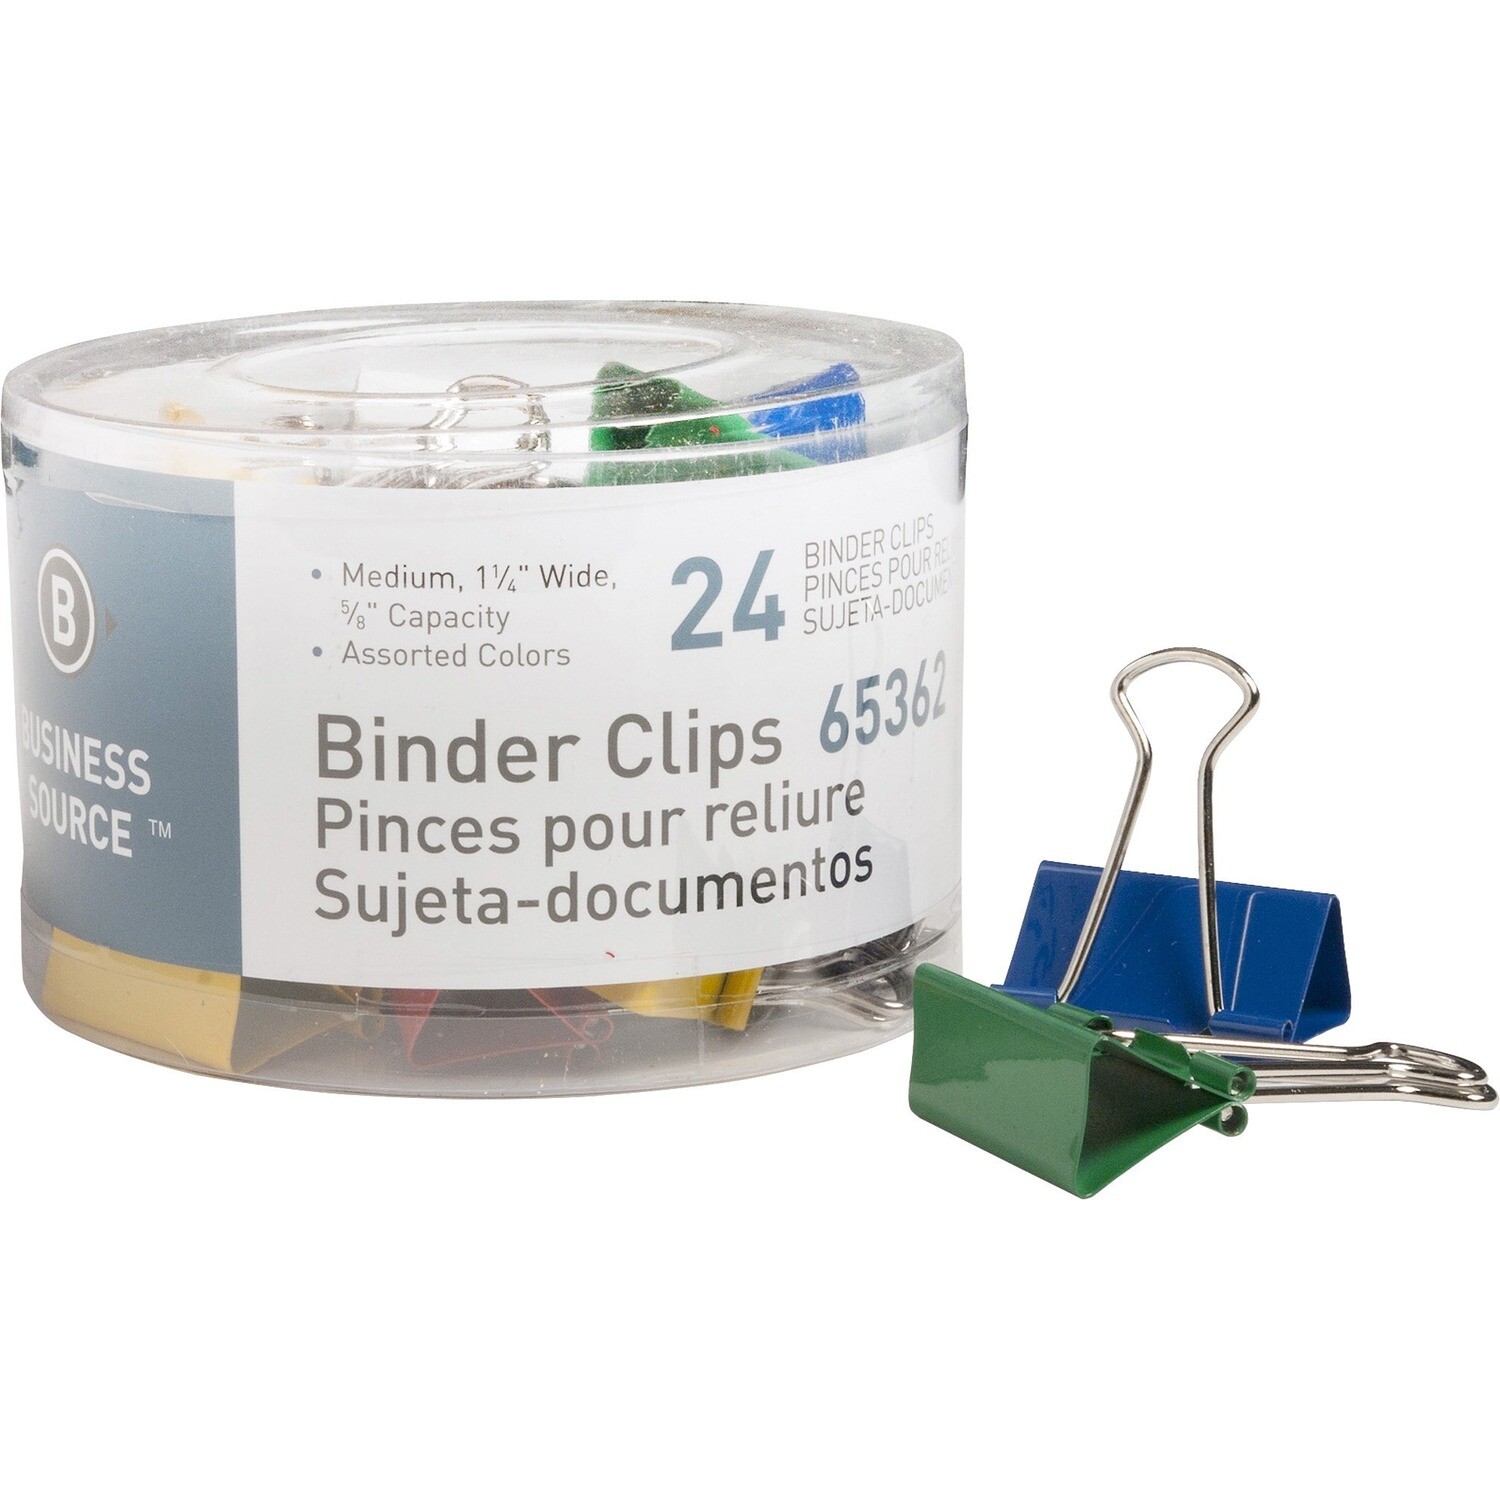 Binder Clips, 1 1/4" 24 Pack, Assorted Colours, Business Source